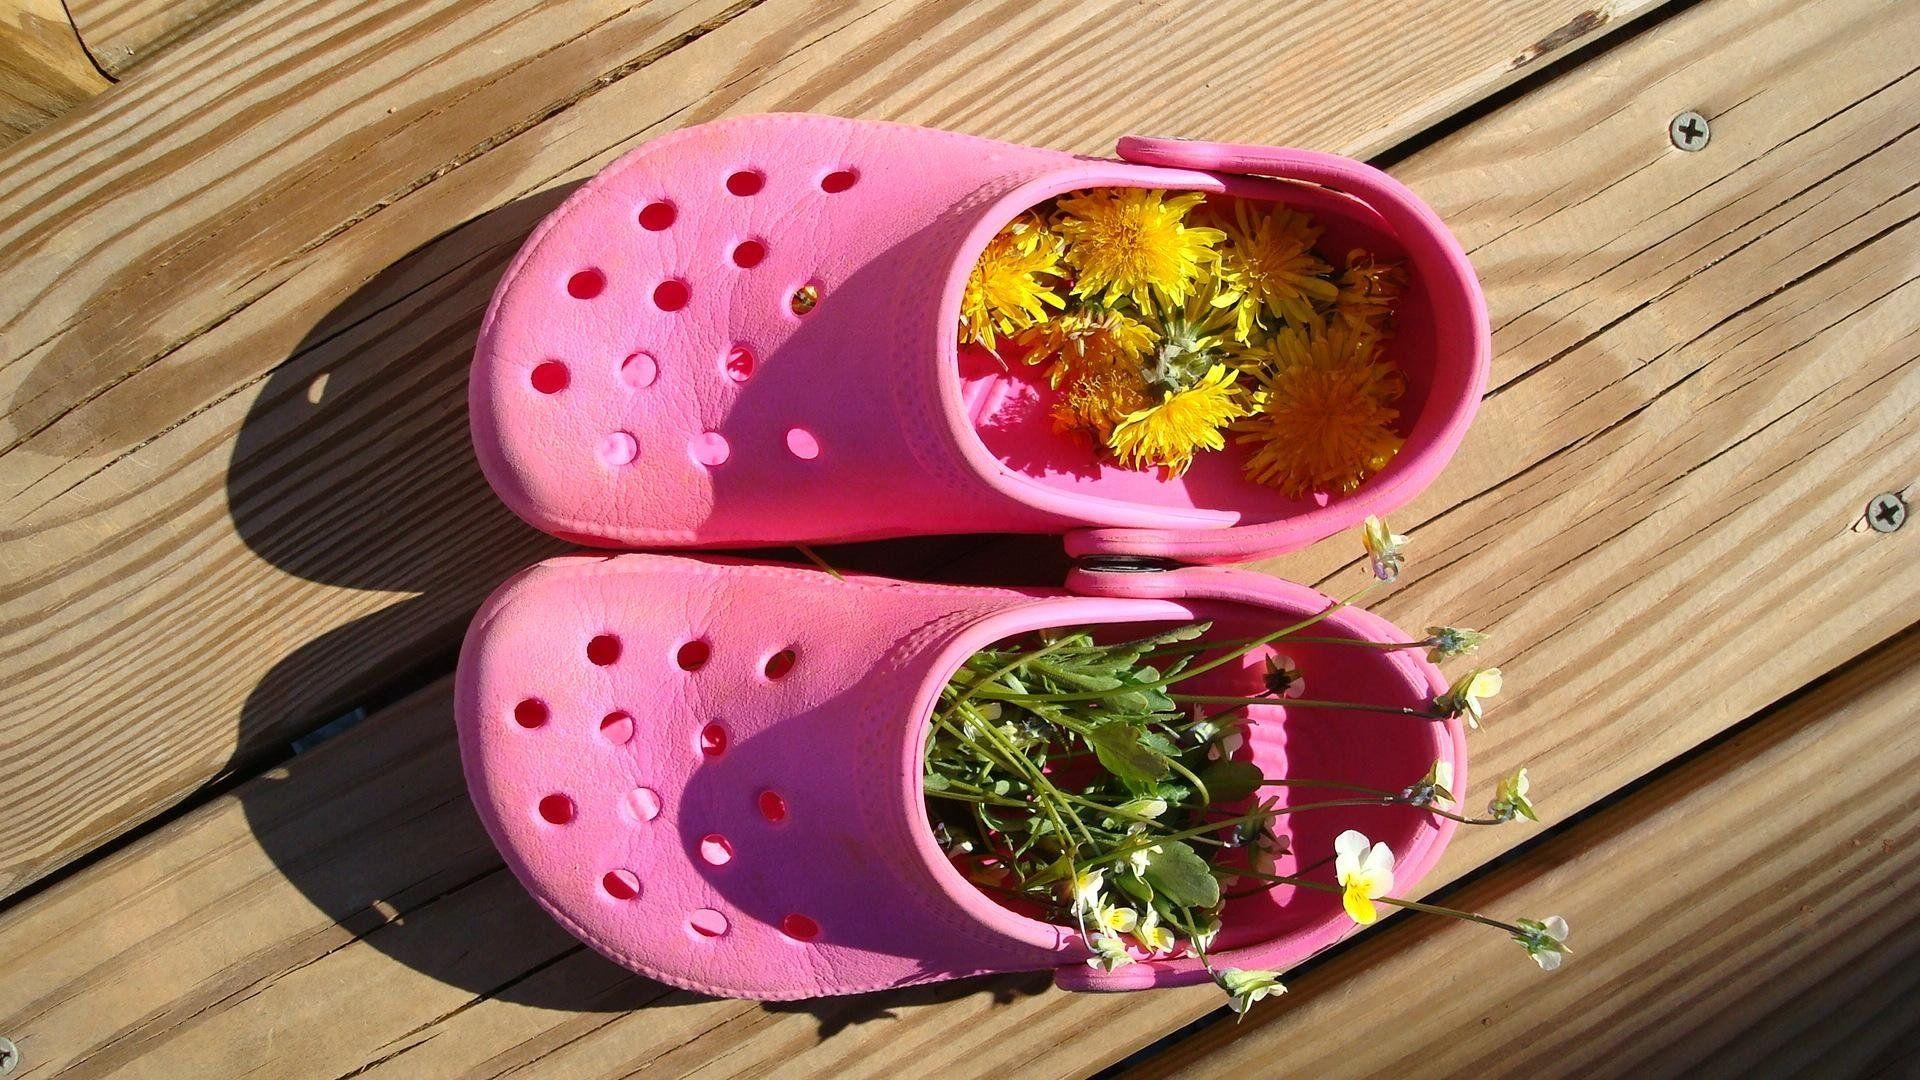 Crocs: Providing all-day comfort, Crocs' Croslit material, Water and odor resistant. 1920x1080 Full HD Background.